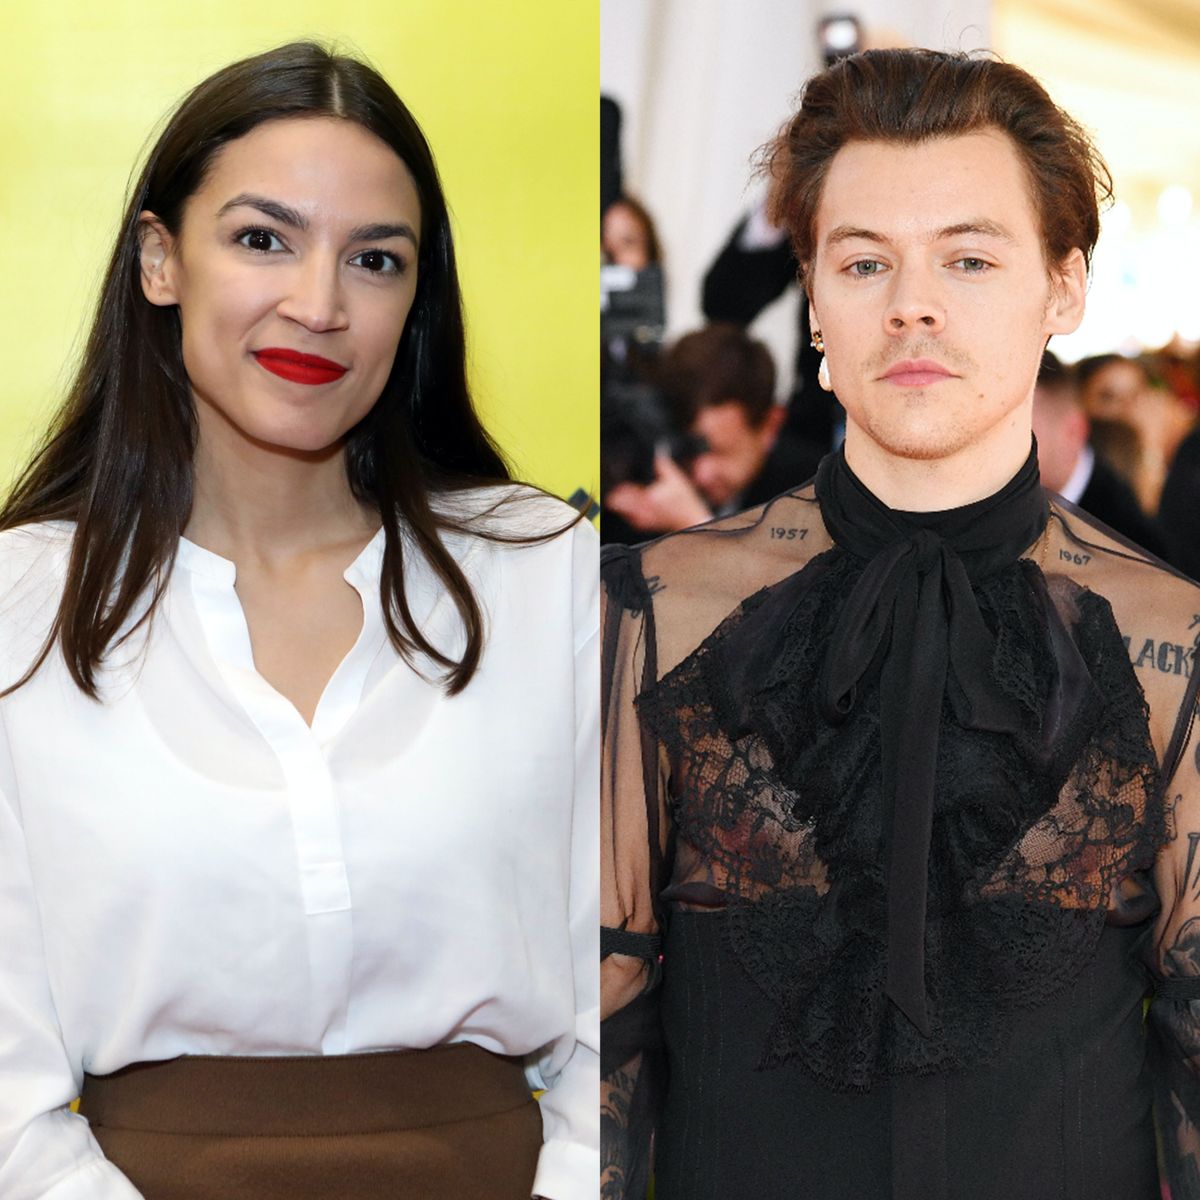 Harry Styles Wants to Remove All Gender Barriers in Fashion